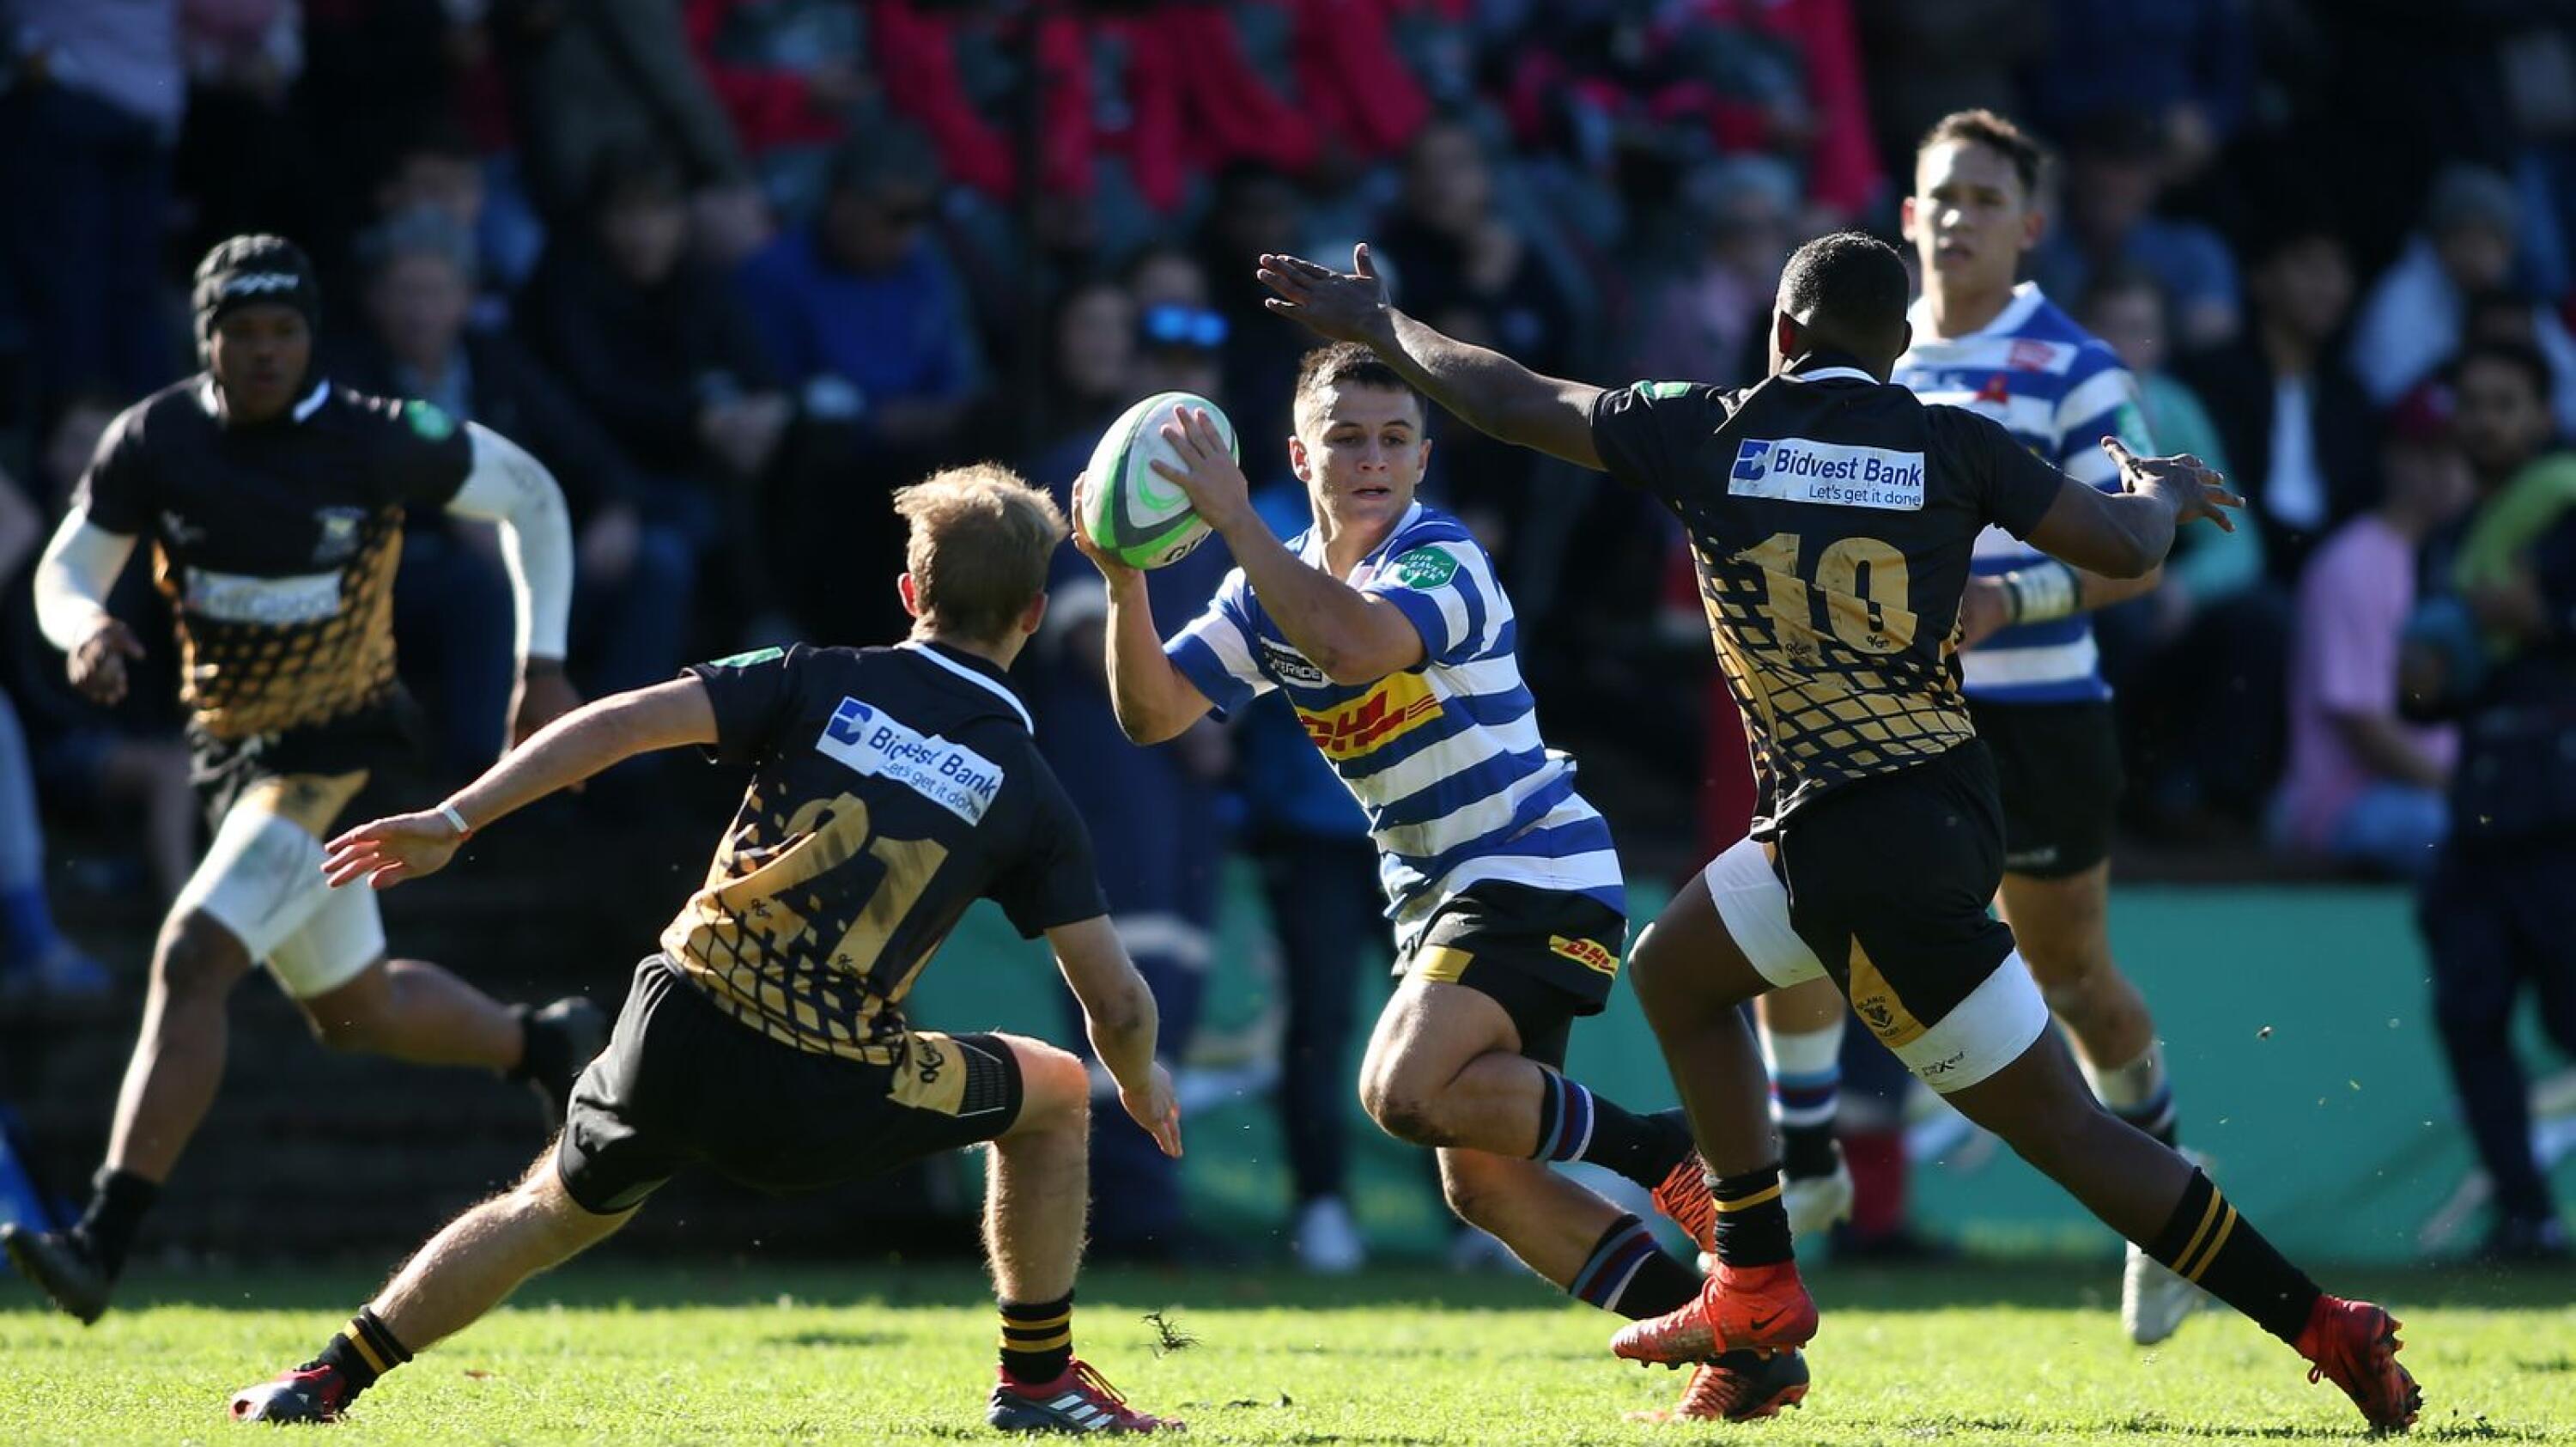 Jandre Genis of Western Province XV on the attack during their Craven Week match against Boland at Rondebosch Boys High School in Cape Town on Monday